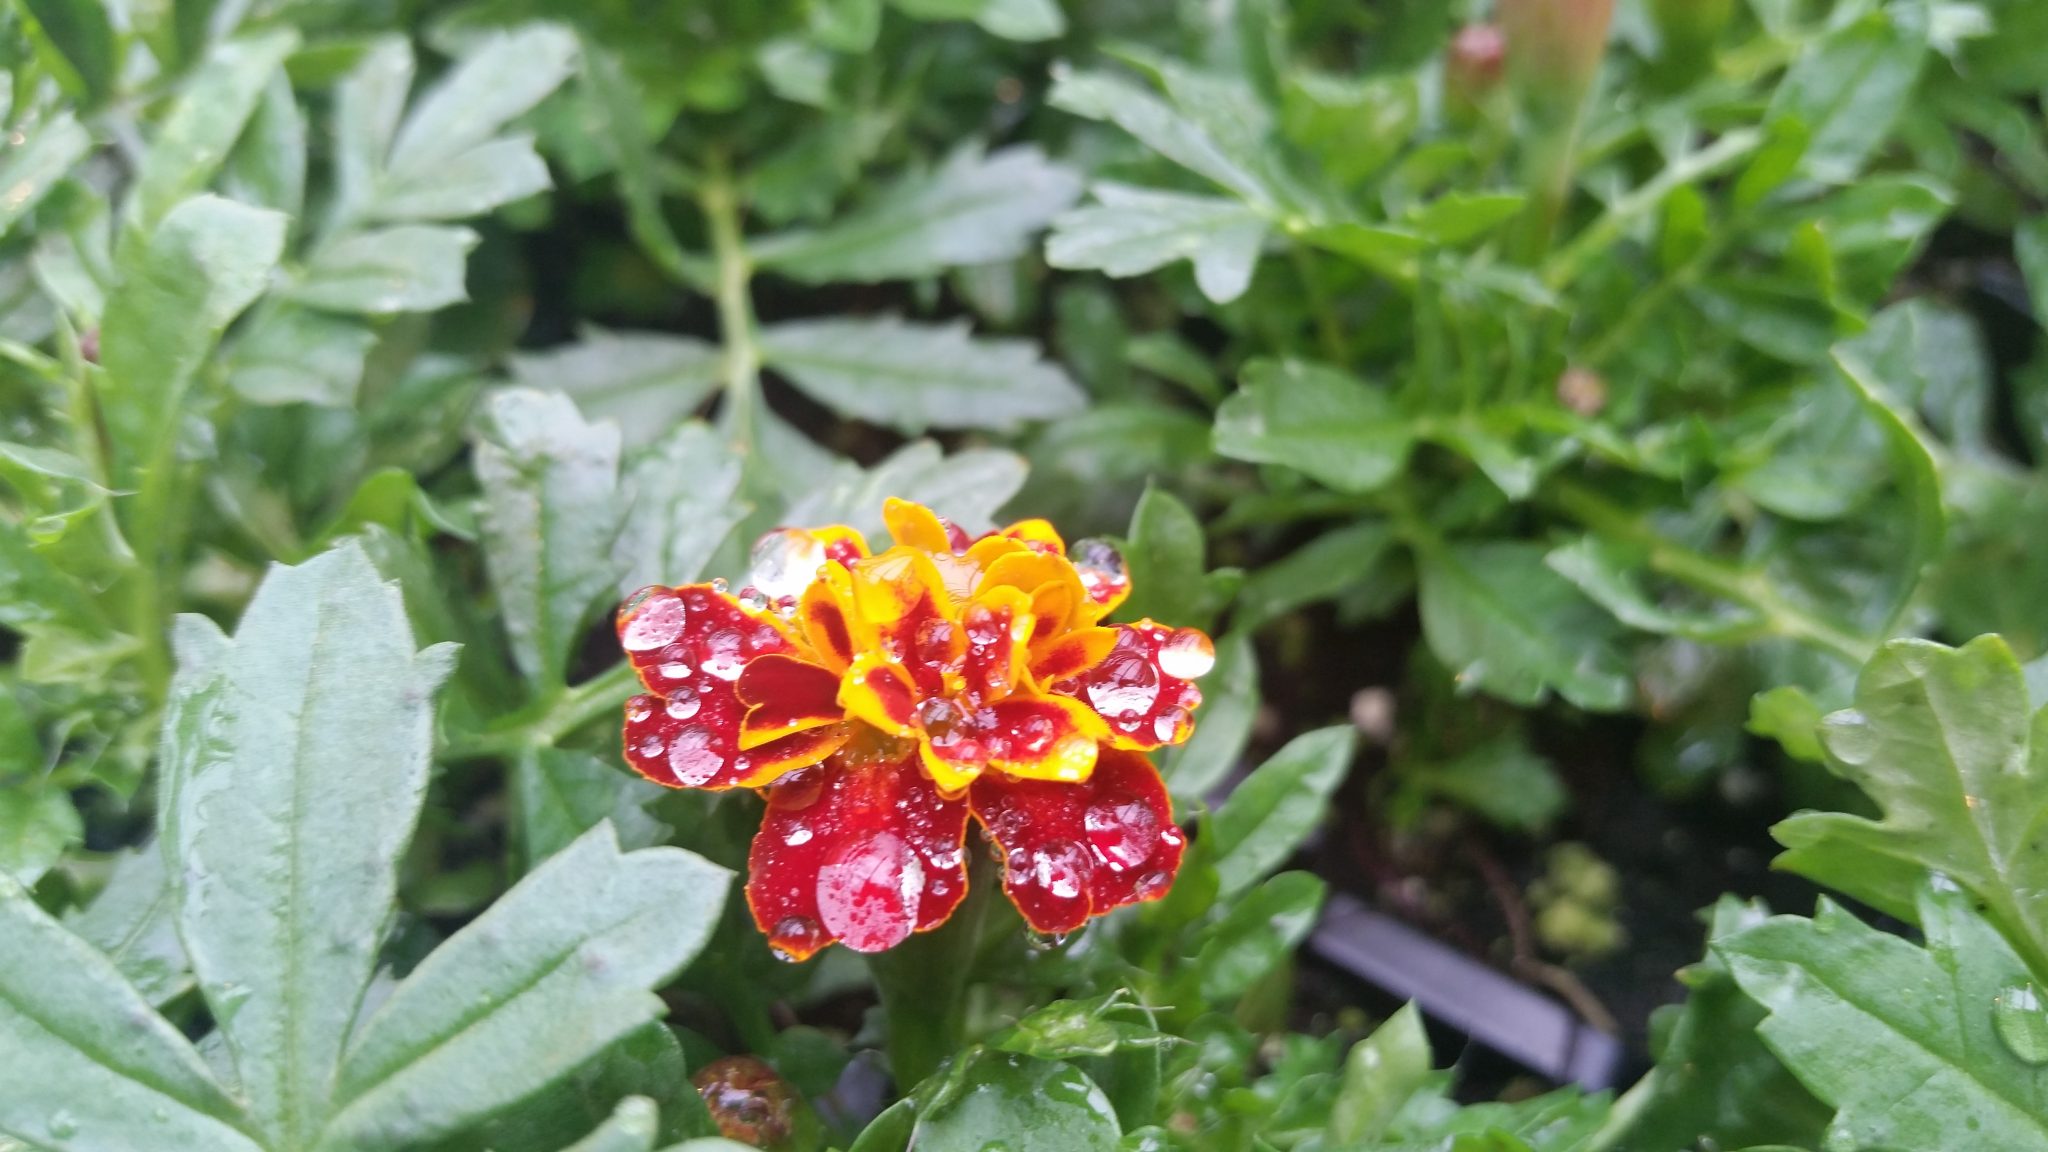 water droplets on flower blossom